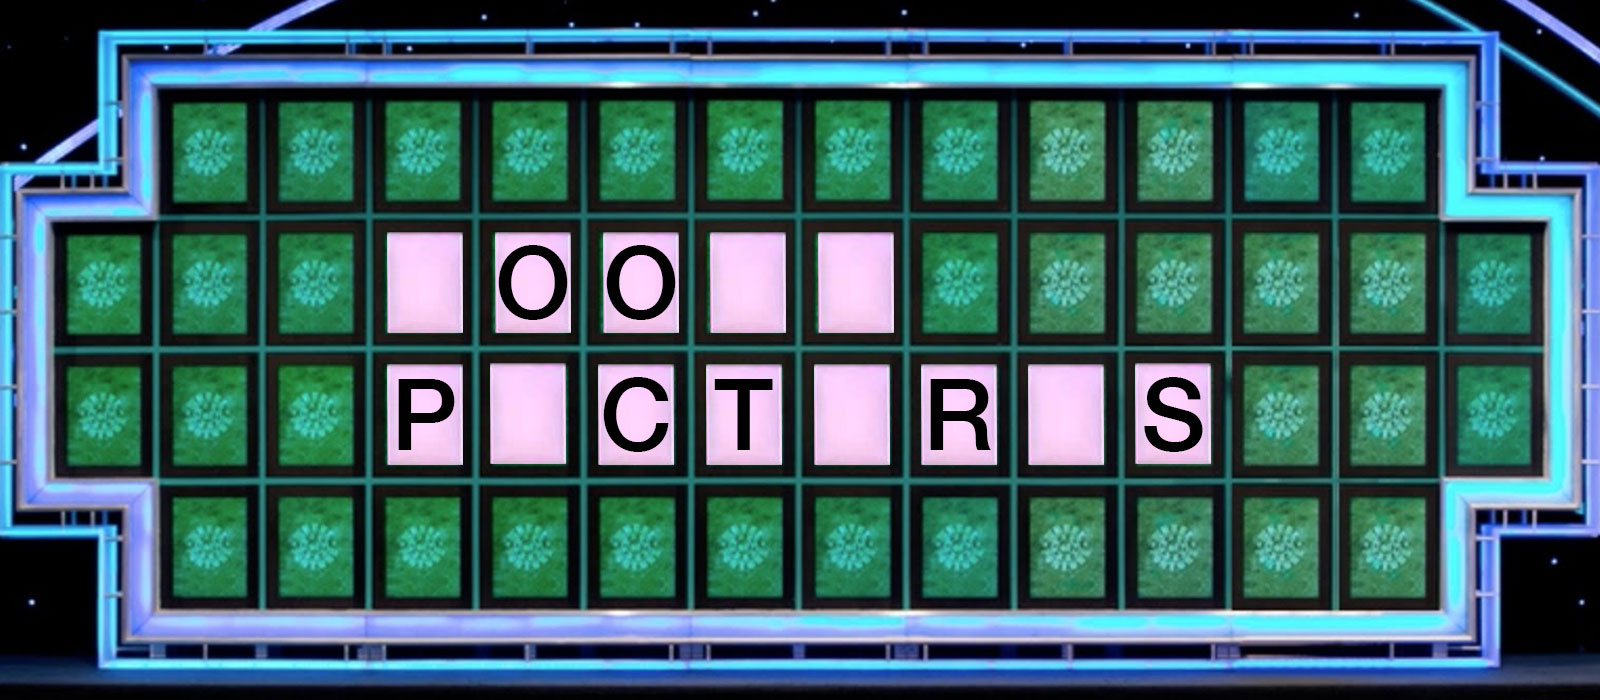 wheel of fortune board game wrong numvers